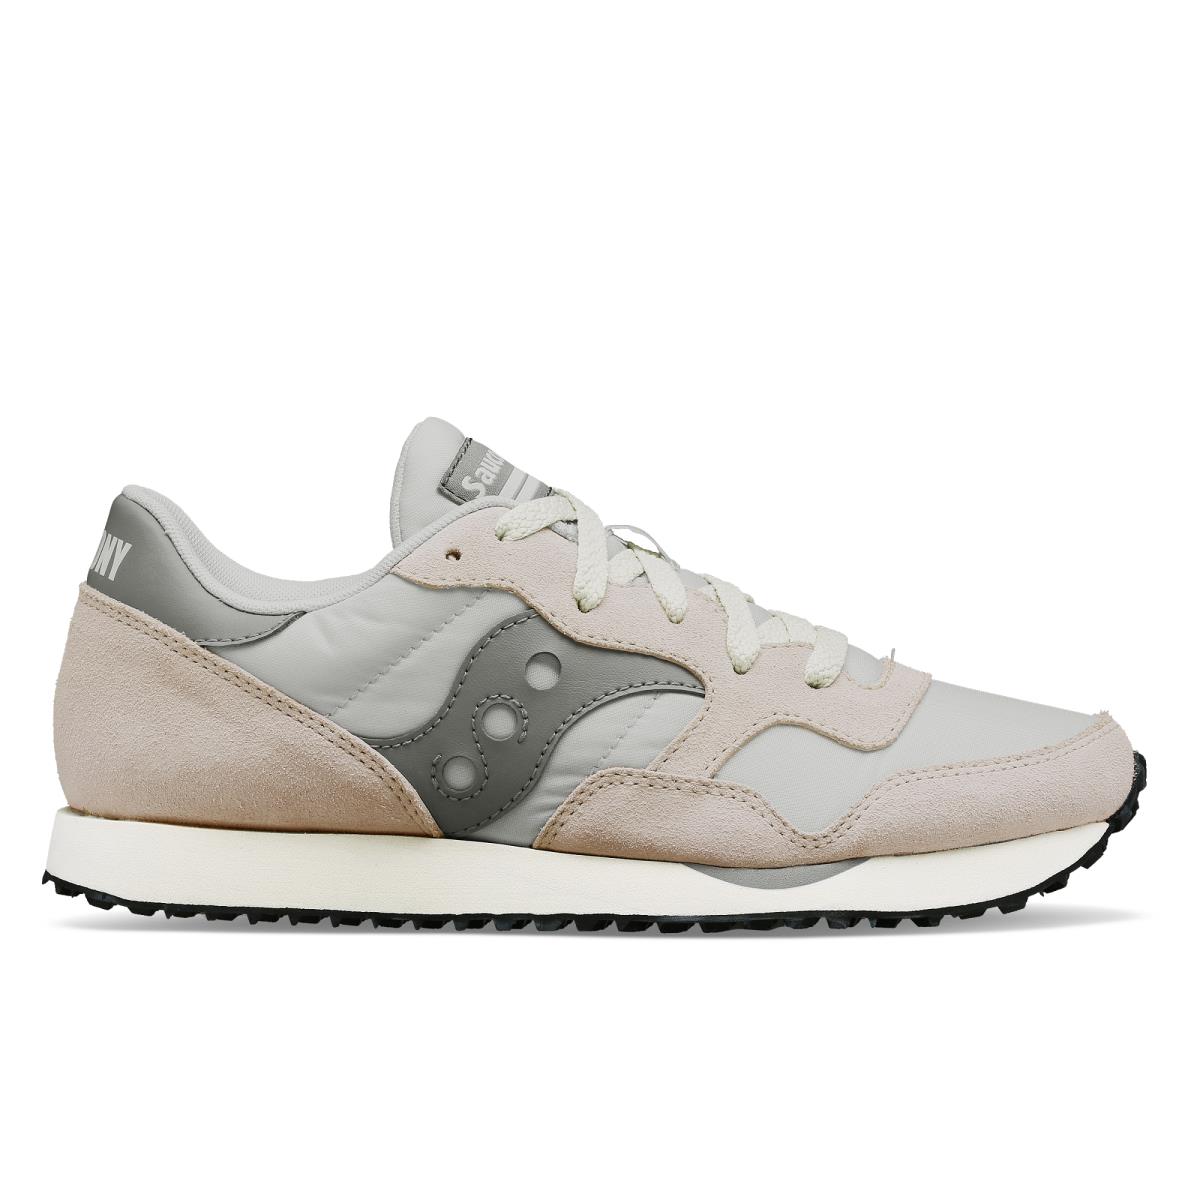 Saucony Women Dxn Trainer Shoes Light Grey | Pink